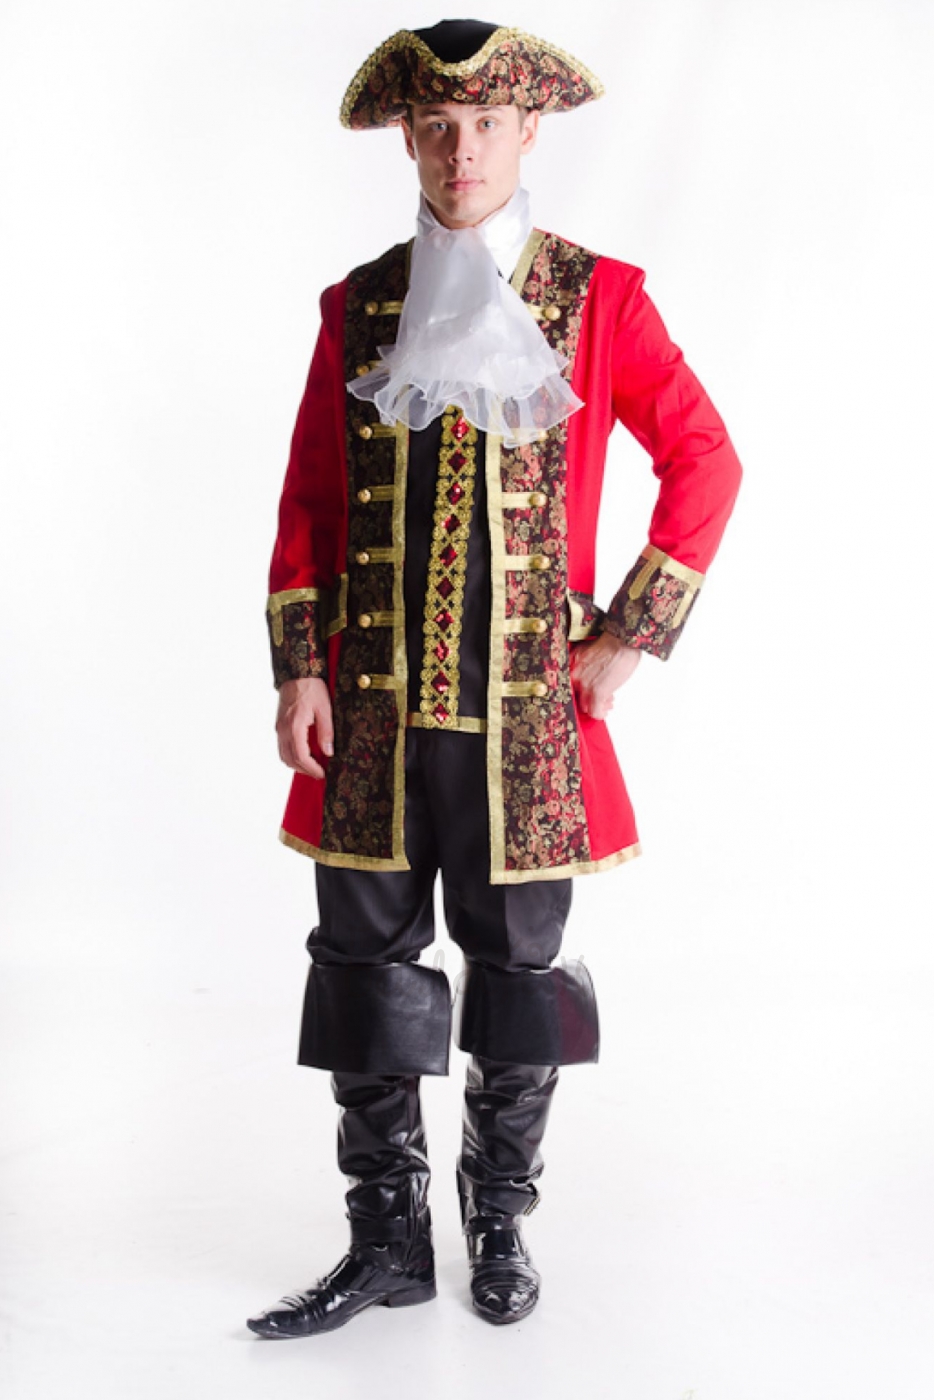 Nobleman costume for man